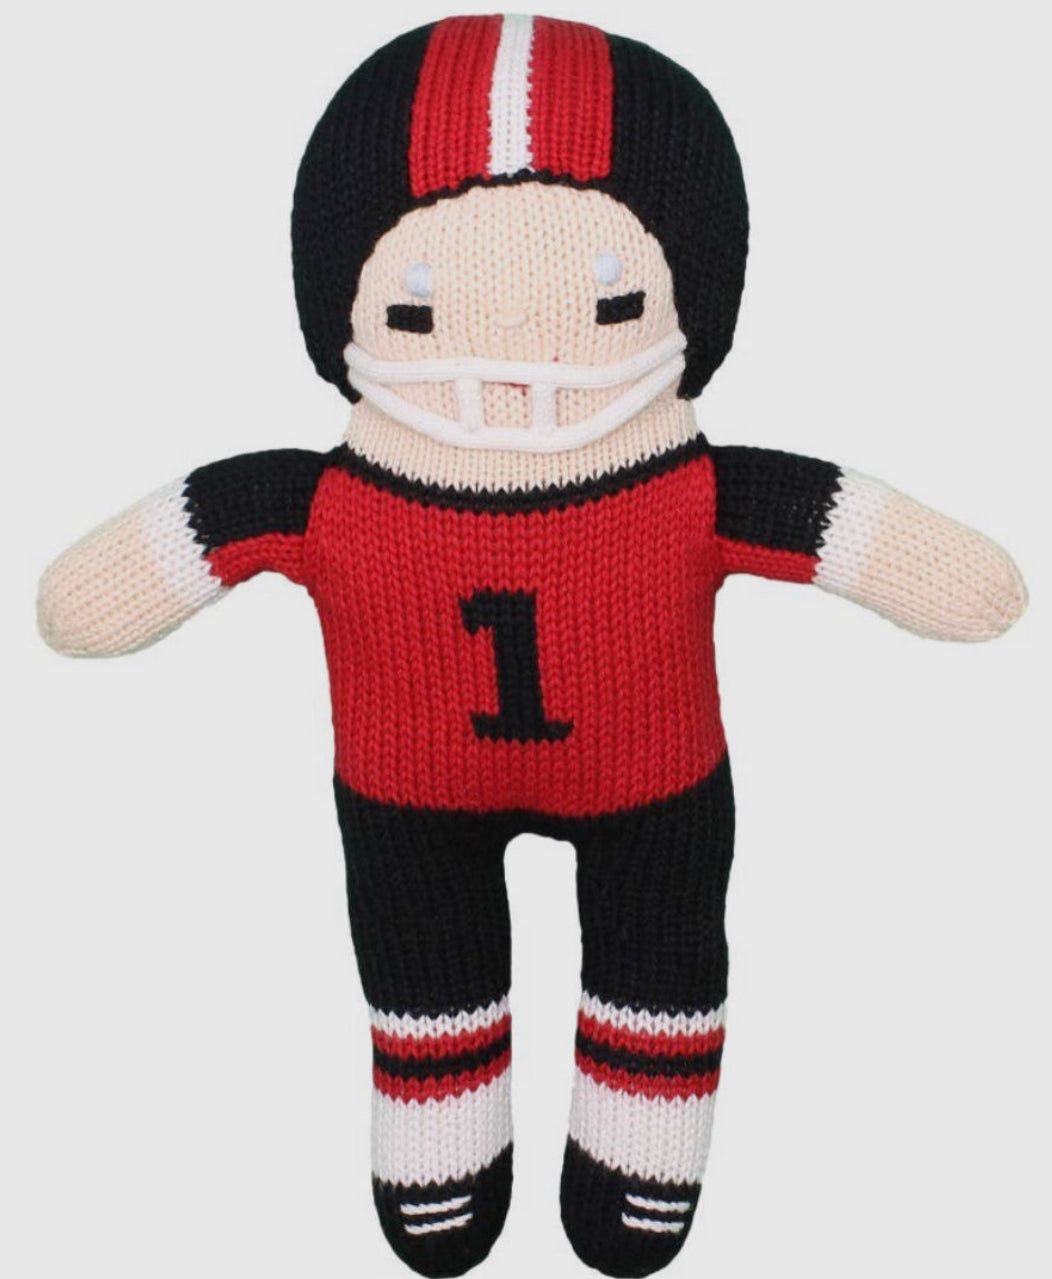 Football Player knit rattle